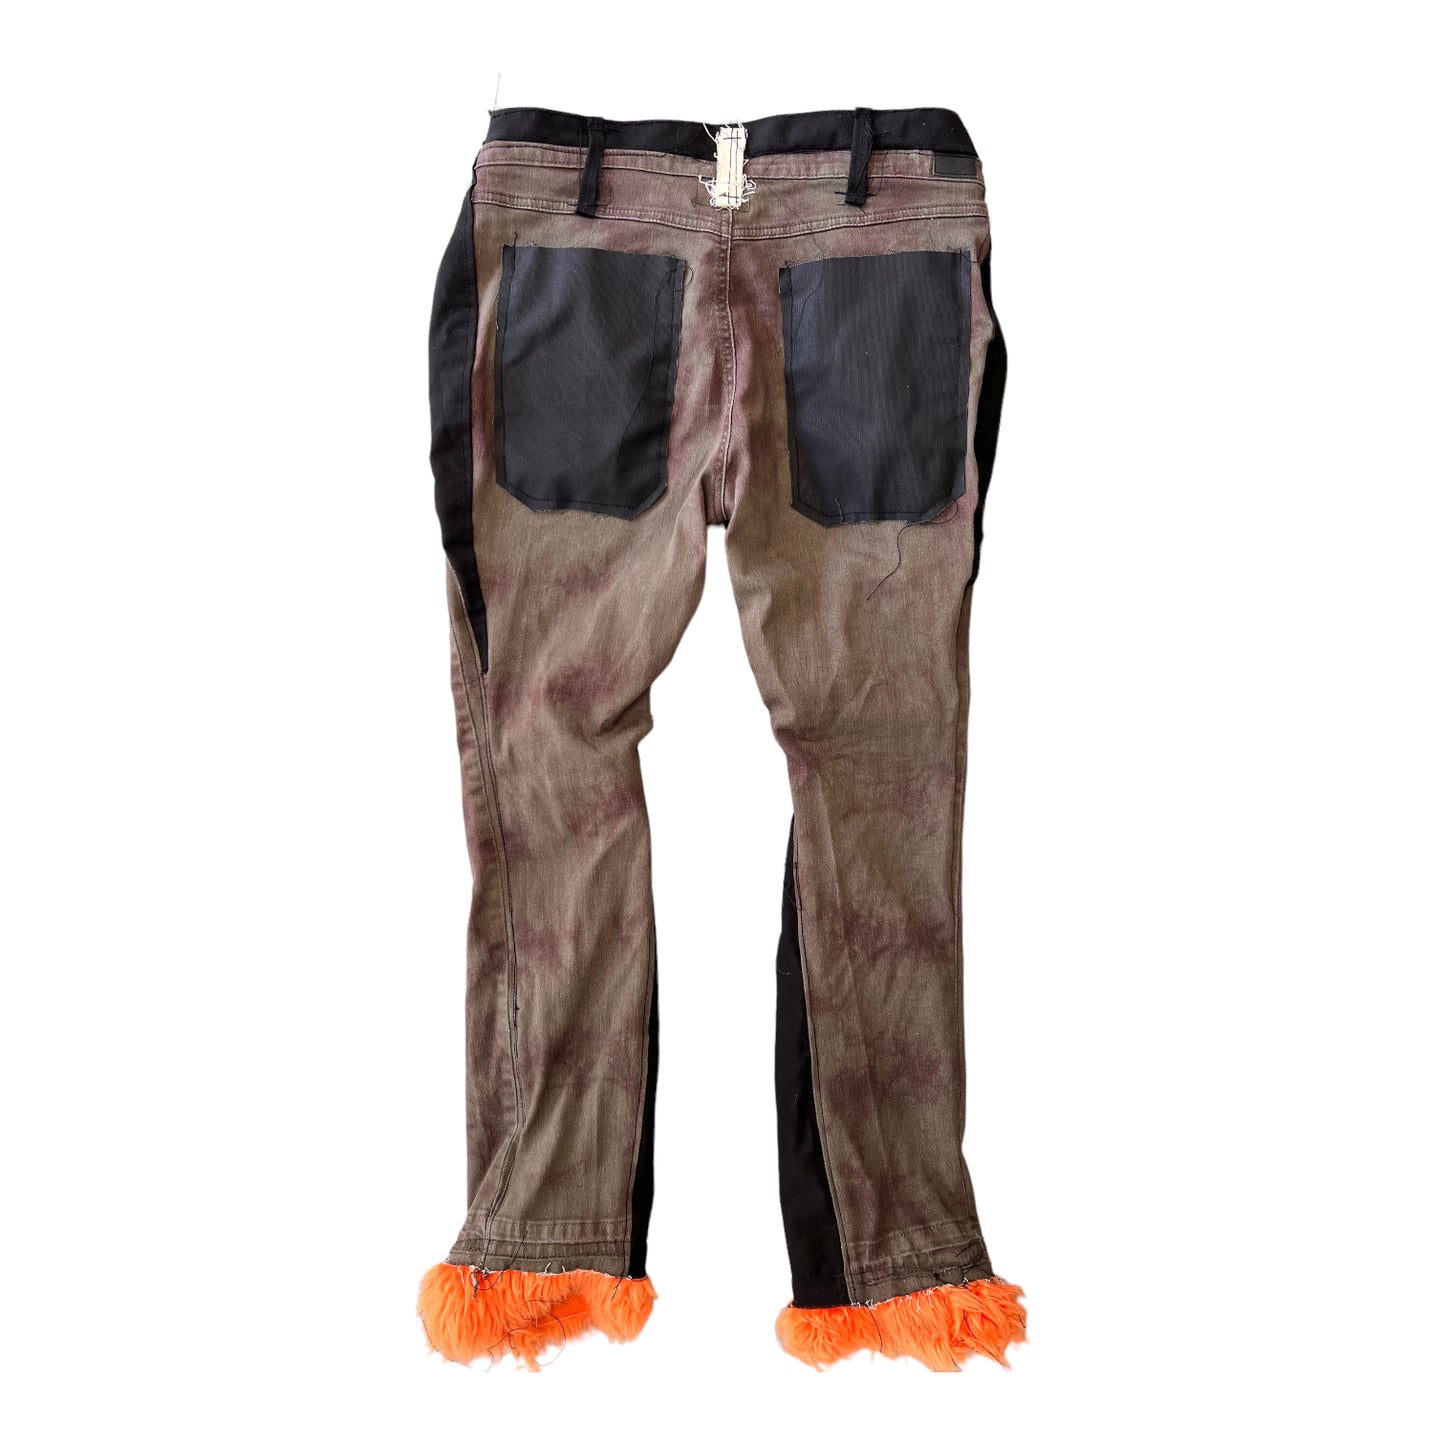 Toth 660 handmade trousers with fluff